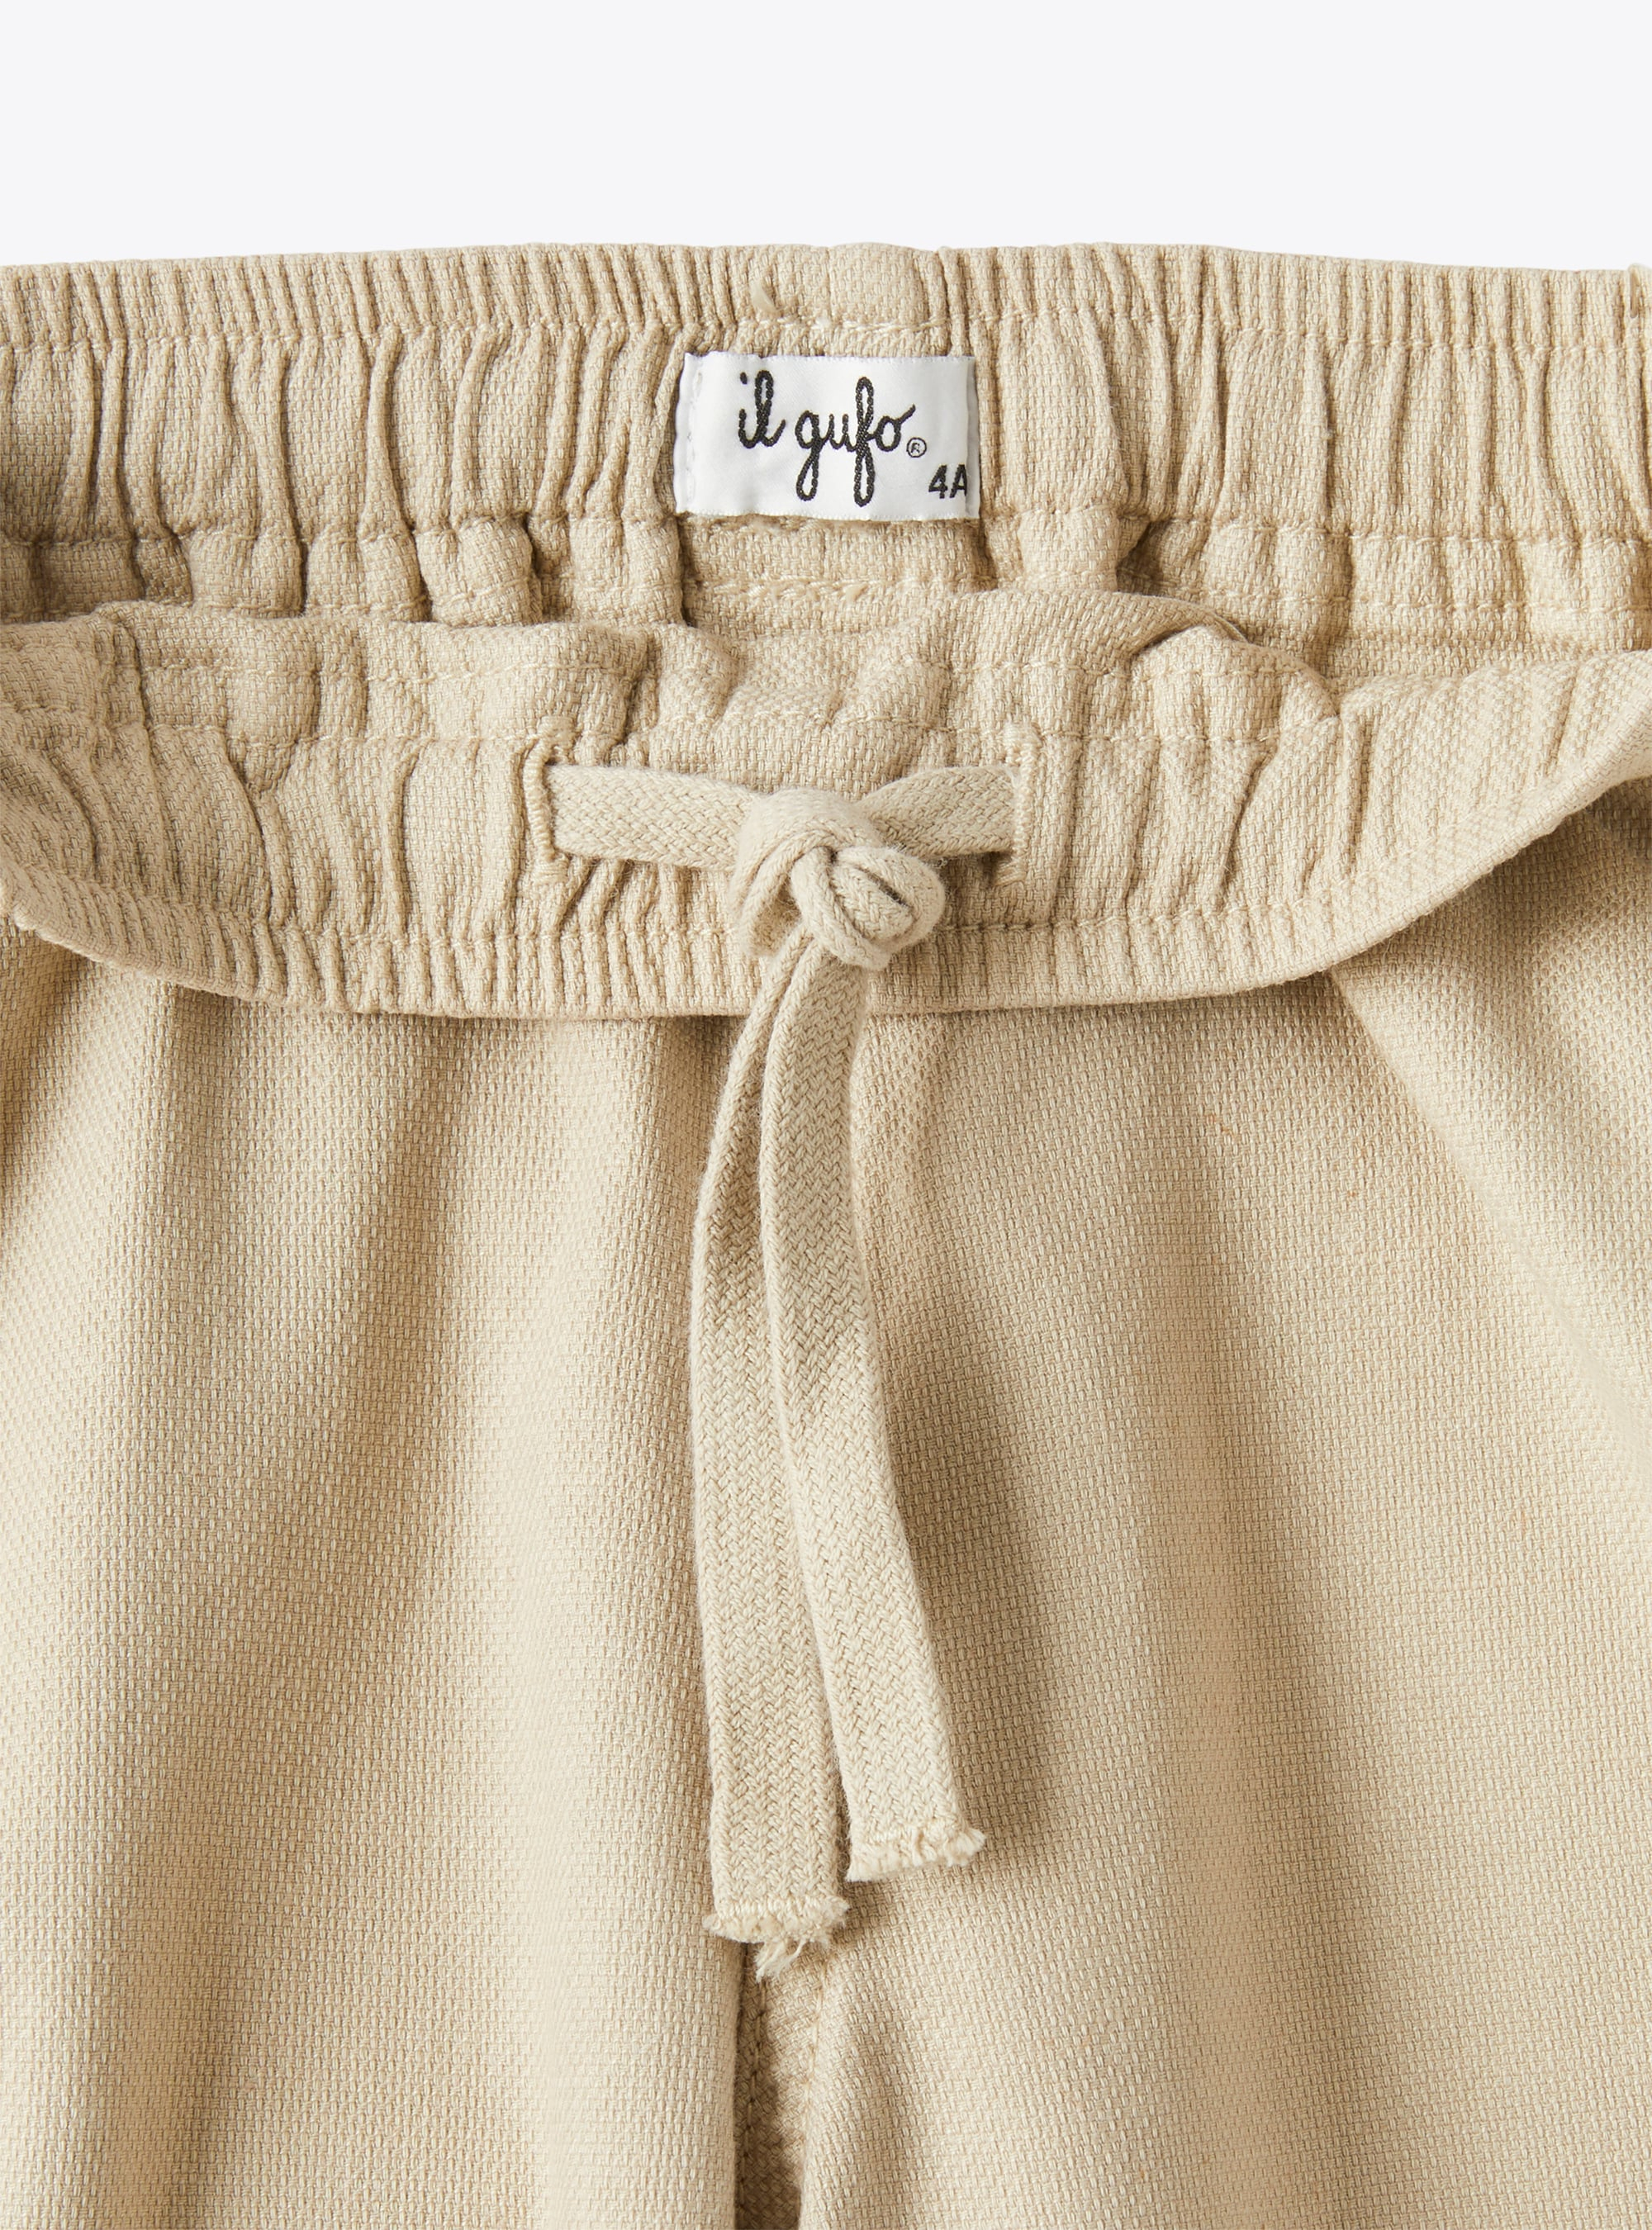 Canvas pants with drawstring - Brown | Il Gufo